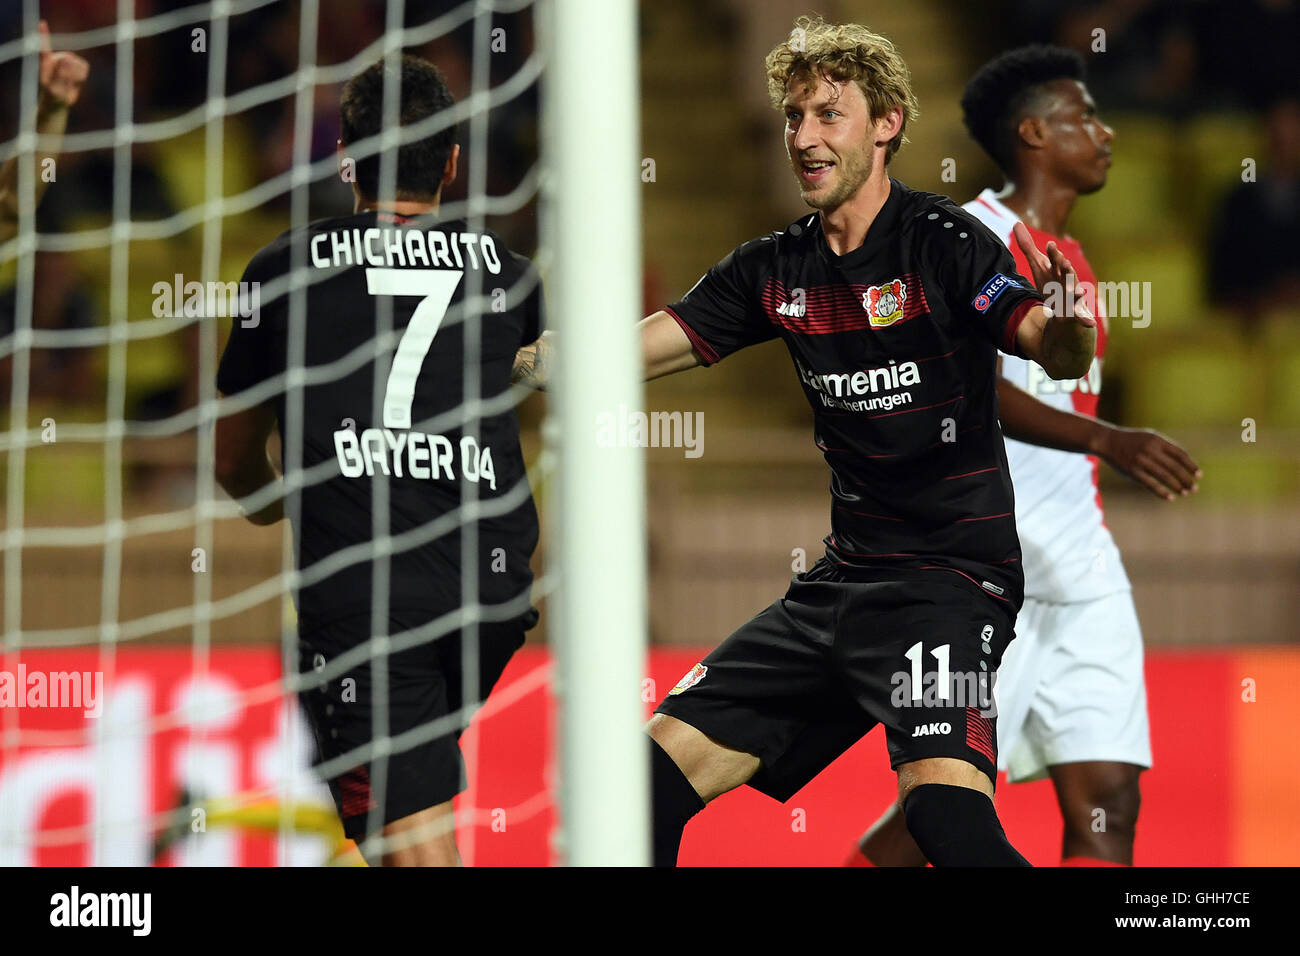 Monaco, Monaco. 27th Sep, 2016. Javier Hernandez (l) and Stefan Kiessling of Bayer Leverkusen celebrates after scoring the 1:0 lead during the UEFA Champions League Group E match between AS Monaco and Bayer Leverkusen at Stade Louis II in Monaco, 27 September 2016. Photo: Federico Gambarini/dpa/Alamy Live News Stock Photo